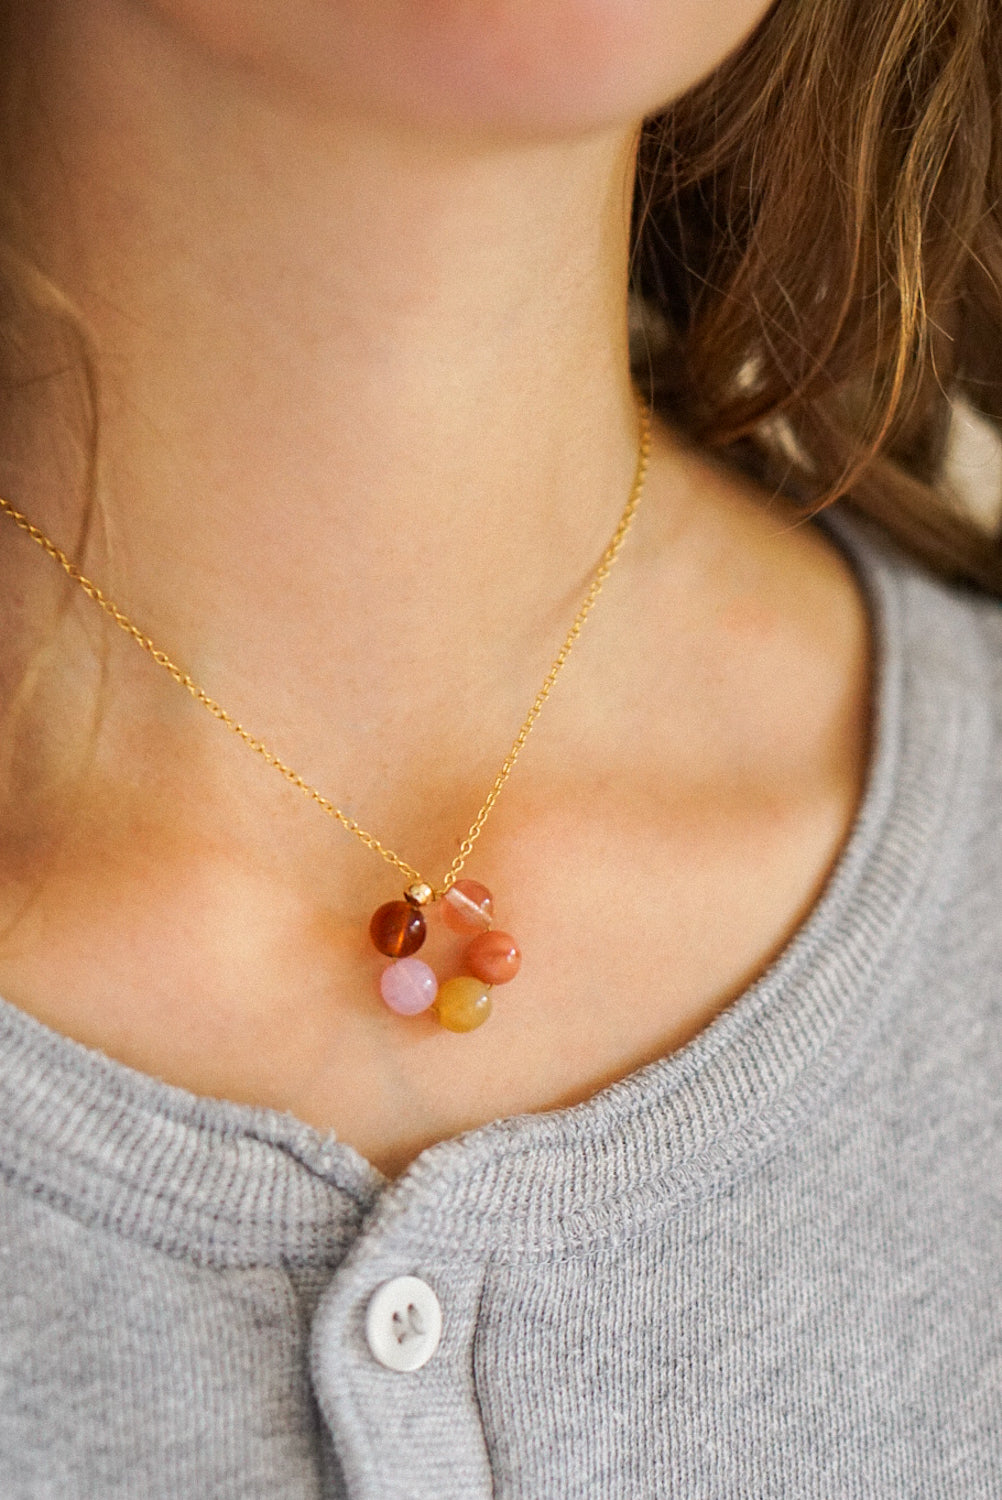 Petal - necklace with pendant - dried flowers (limited edition)